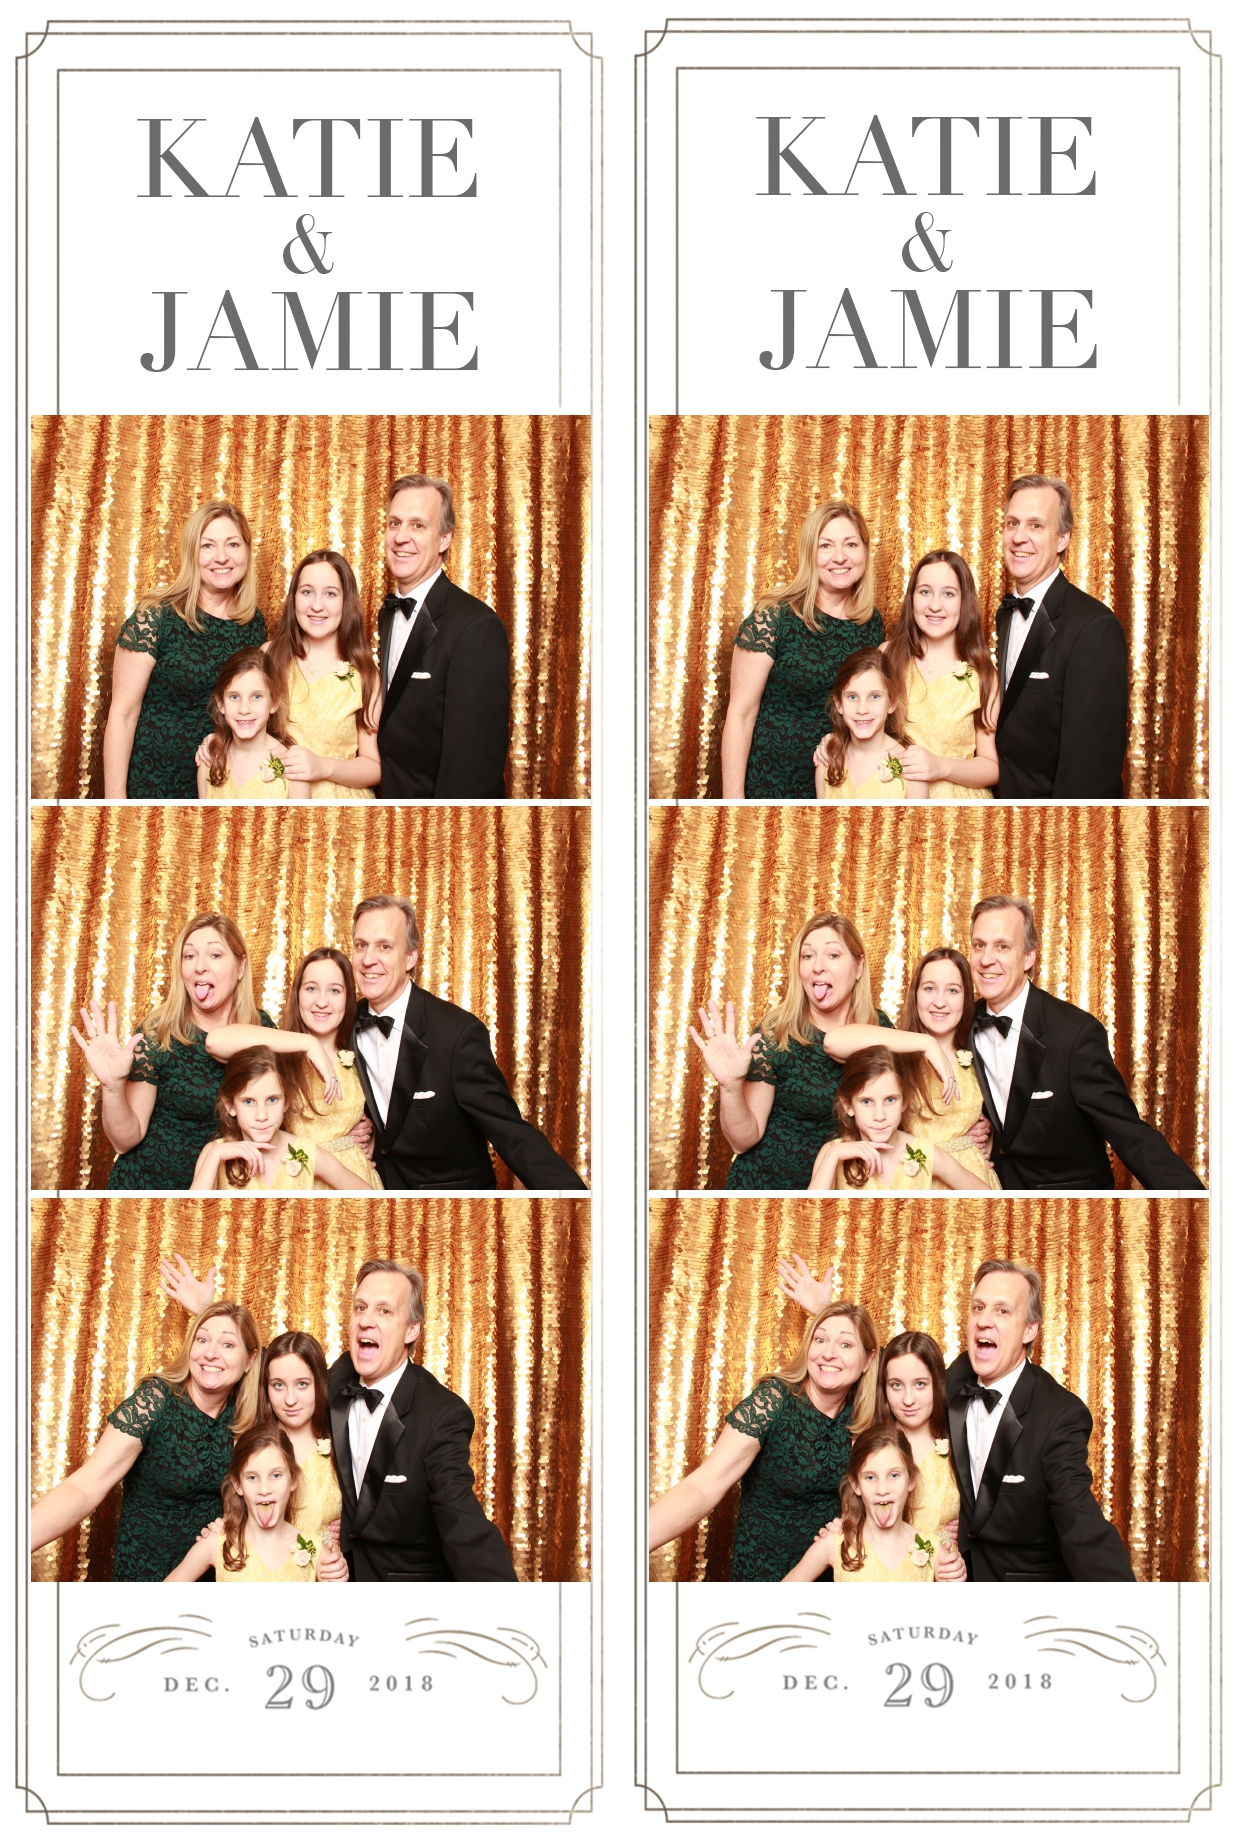 Oh Happy Day Booth - Katie and Jamie Customized26.jpg